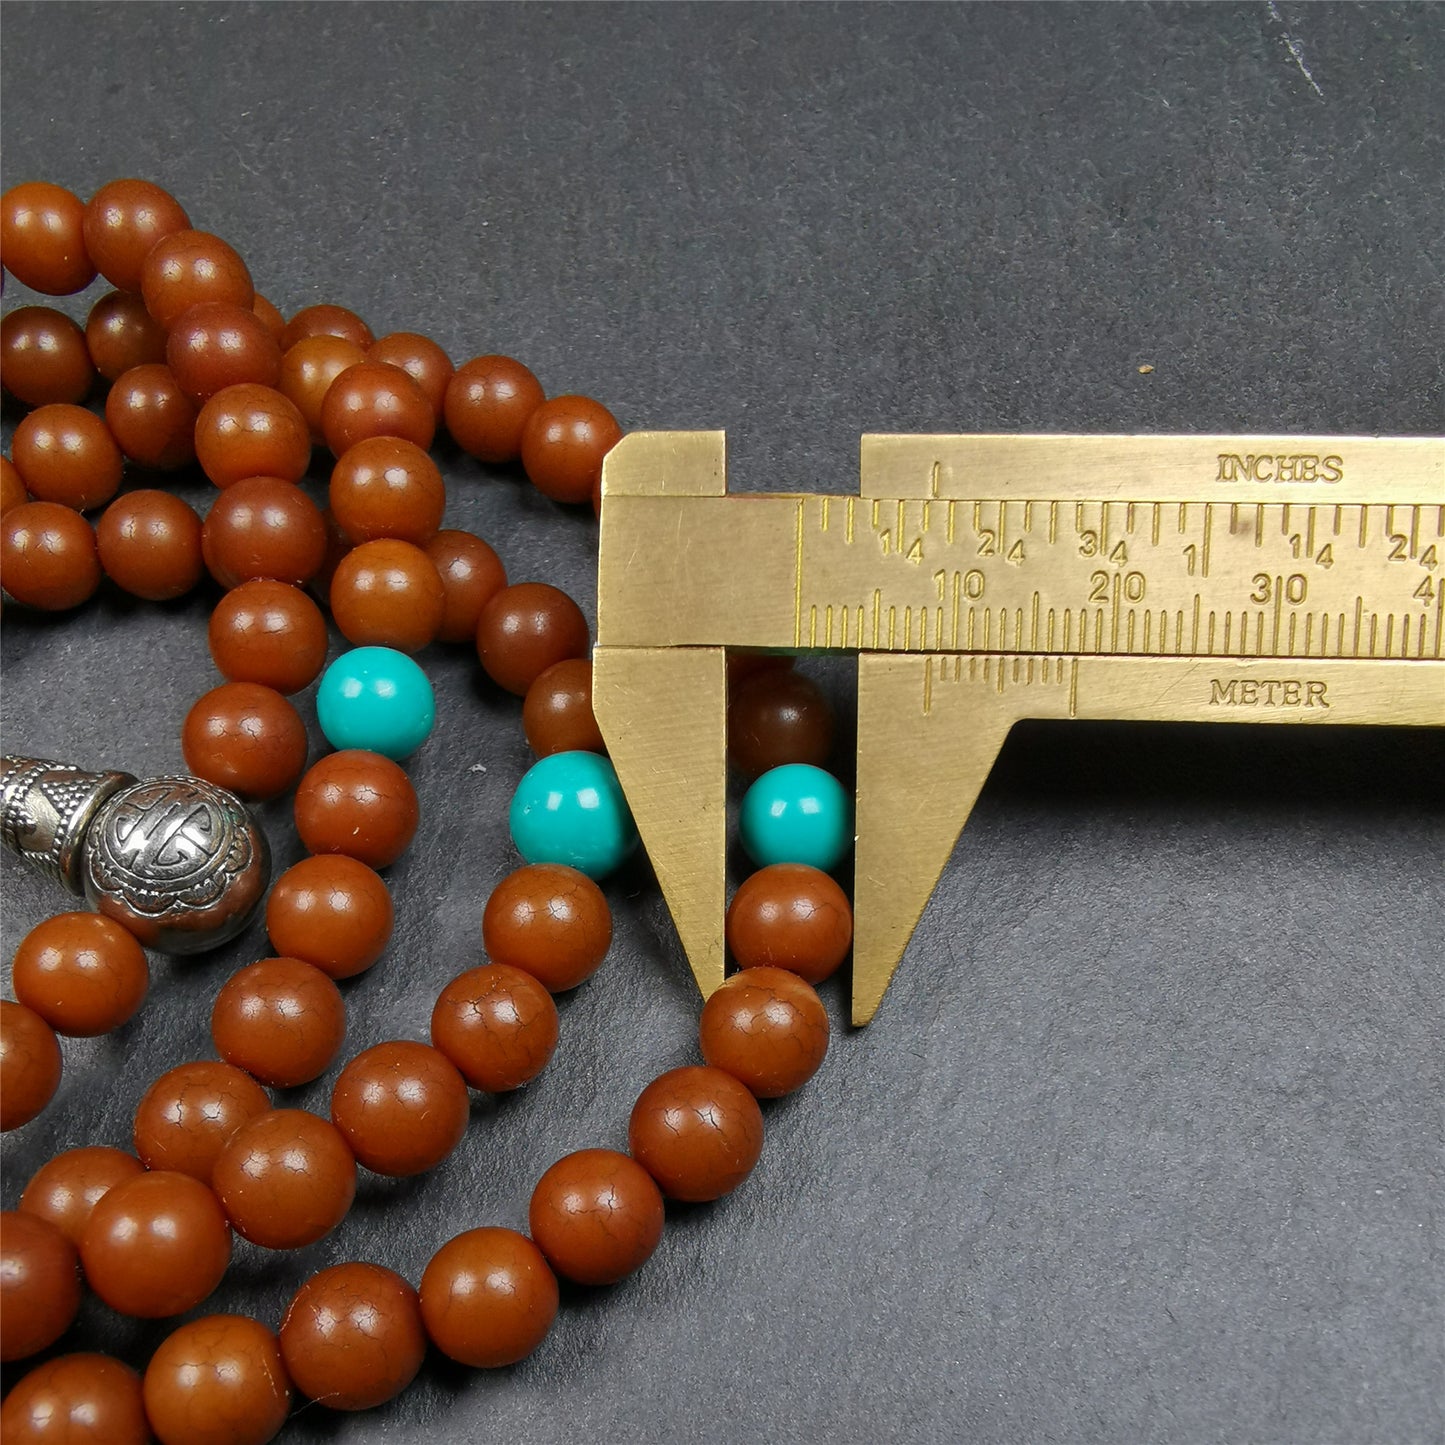 This mala was made by Tibetan craftsme.  It is made of Corypha Linn Seeds, diameter of 8.5mm,0.34 inch,circumference is 90cm,35 inches ,with 3 turquoise bead, end of a white copper guru bead.